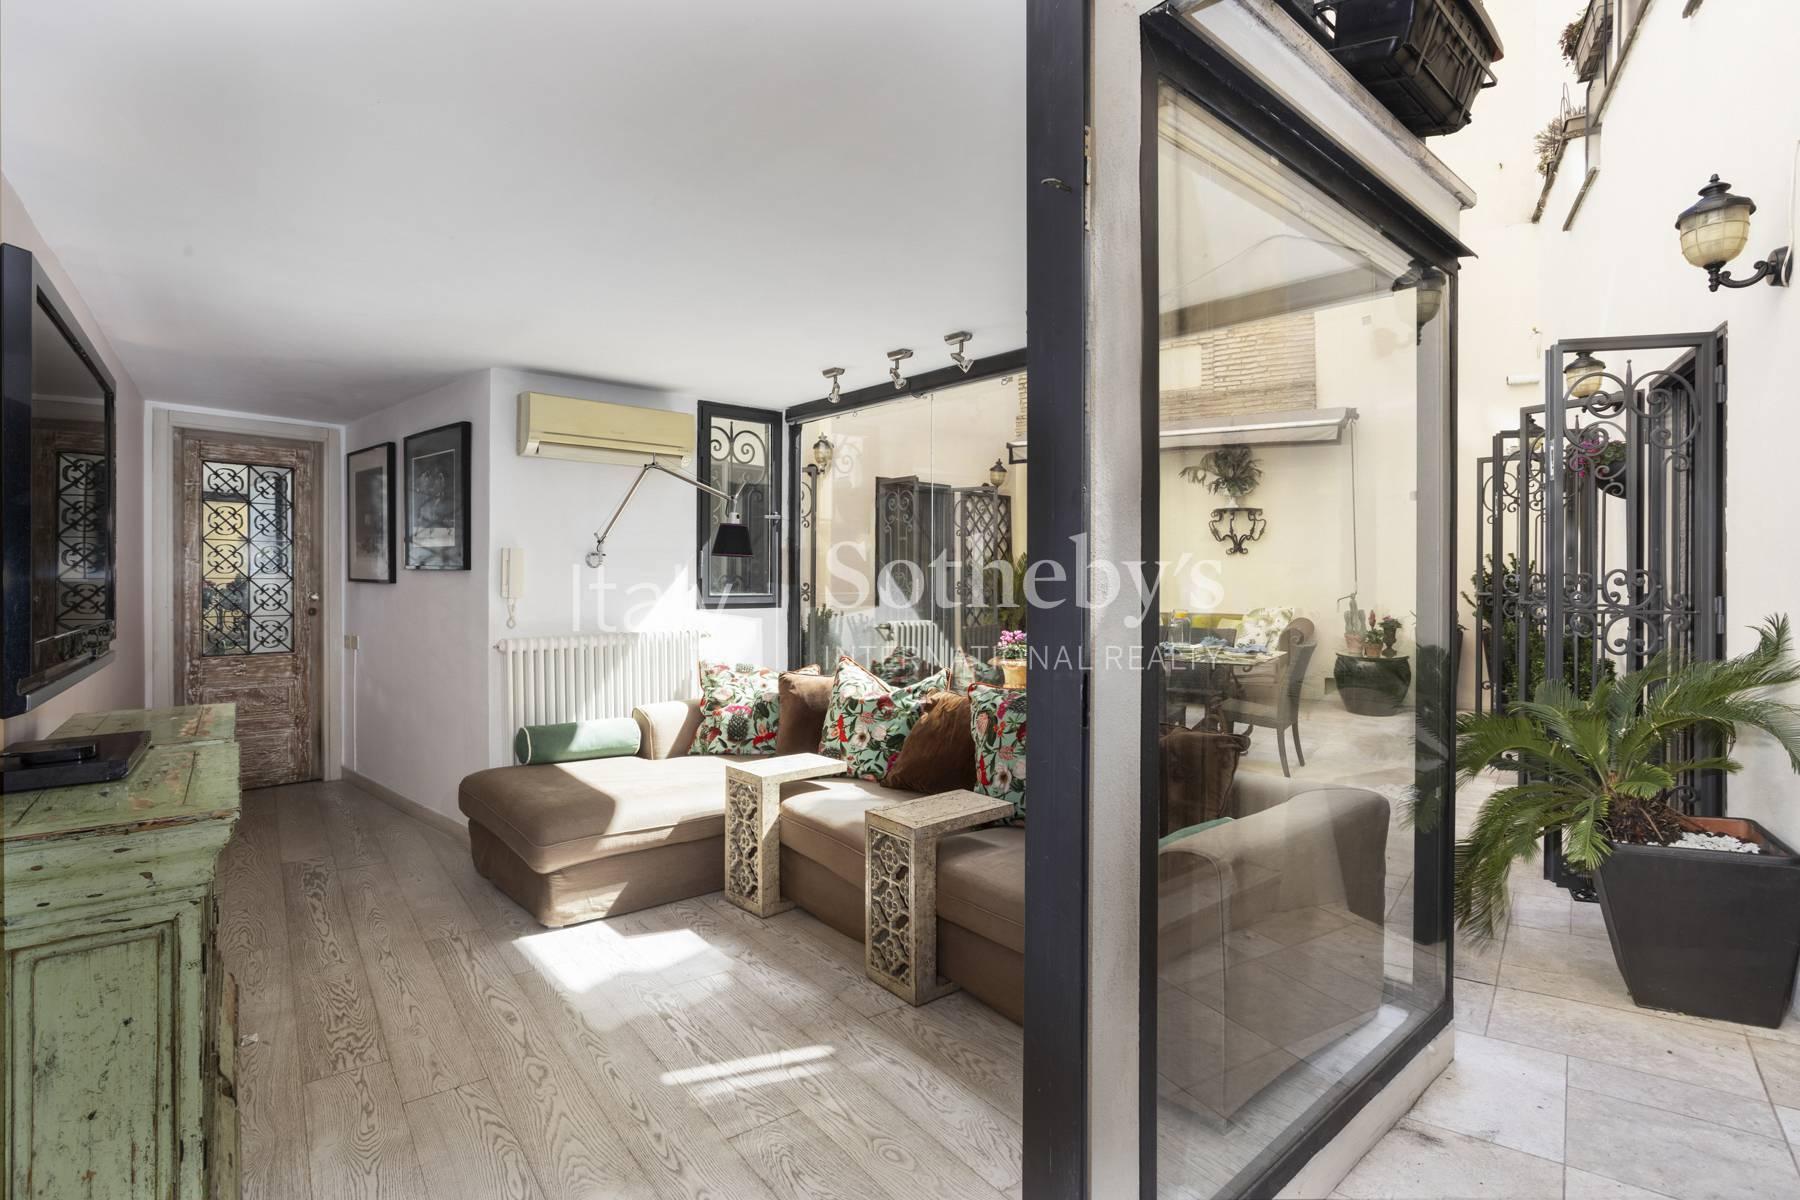 Apartment with terraces a stone's throw from Piazza Navona - 9